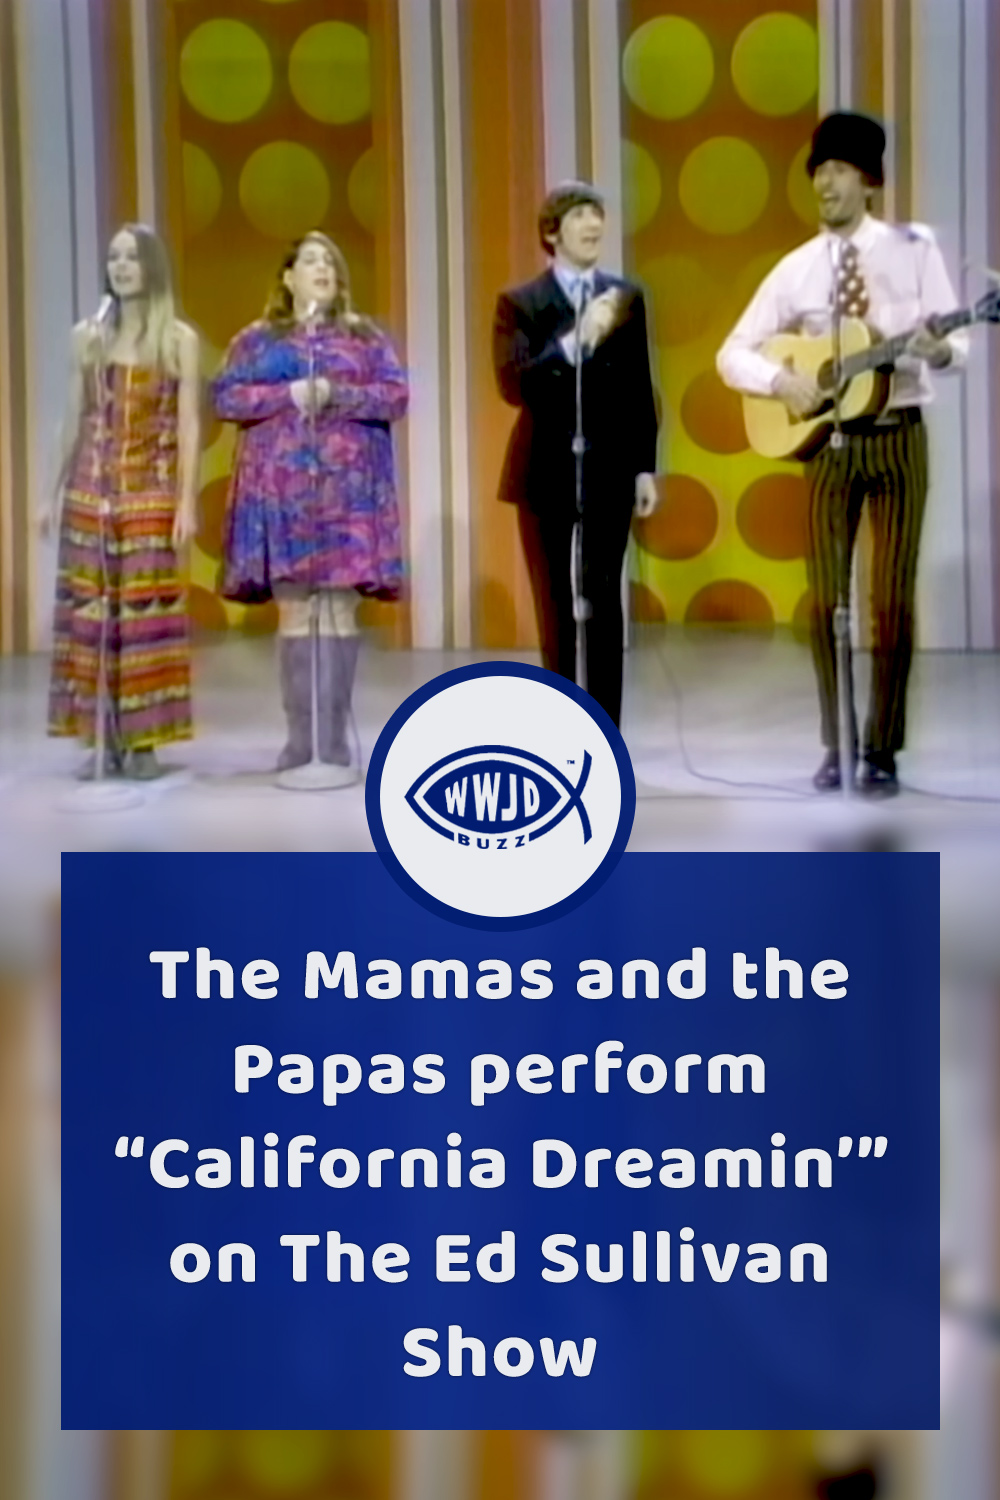 The Mamas and the Papas perform “California Dreamin’” on The Ed Sullivan Show